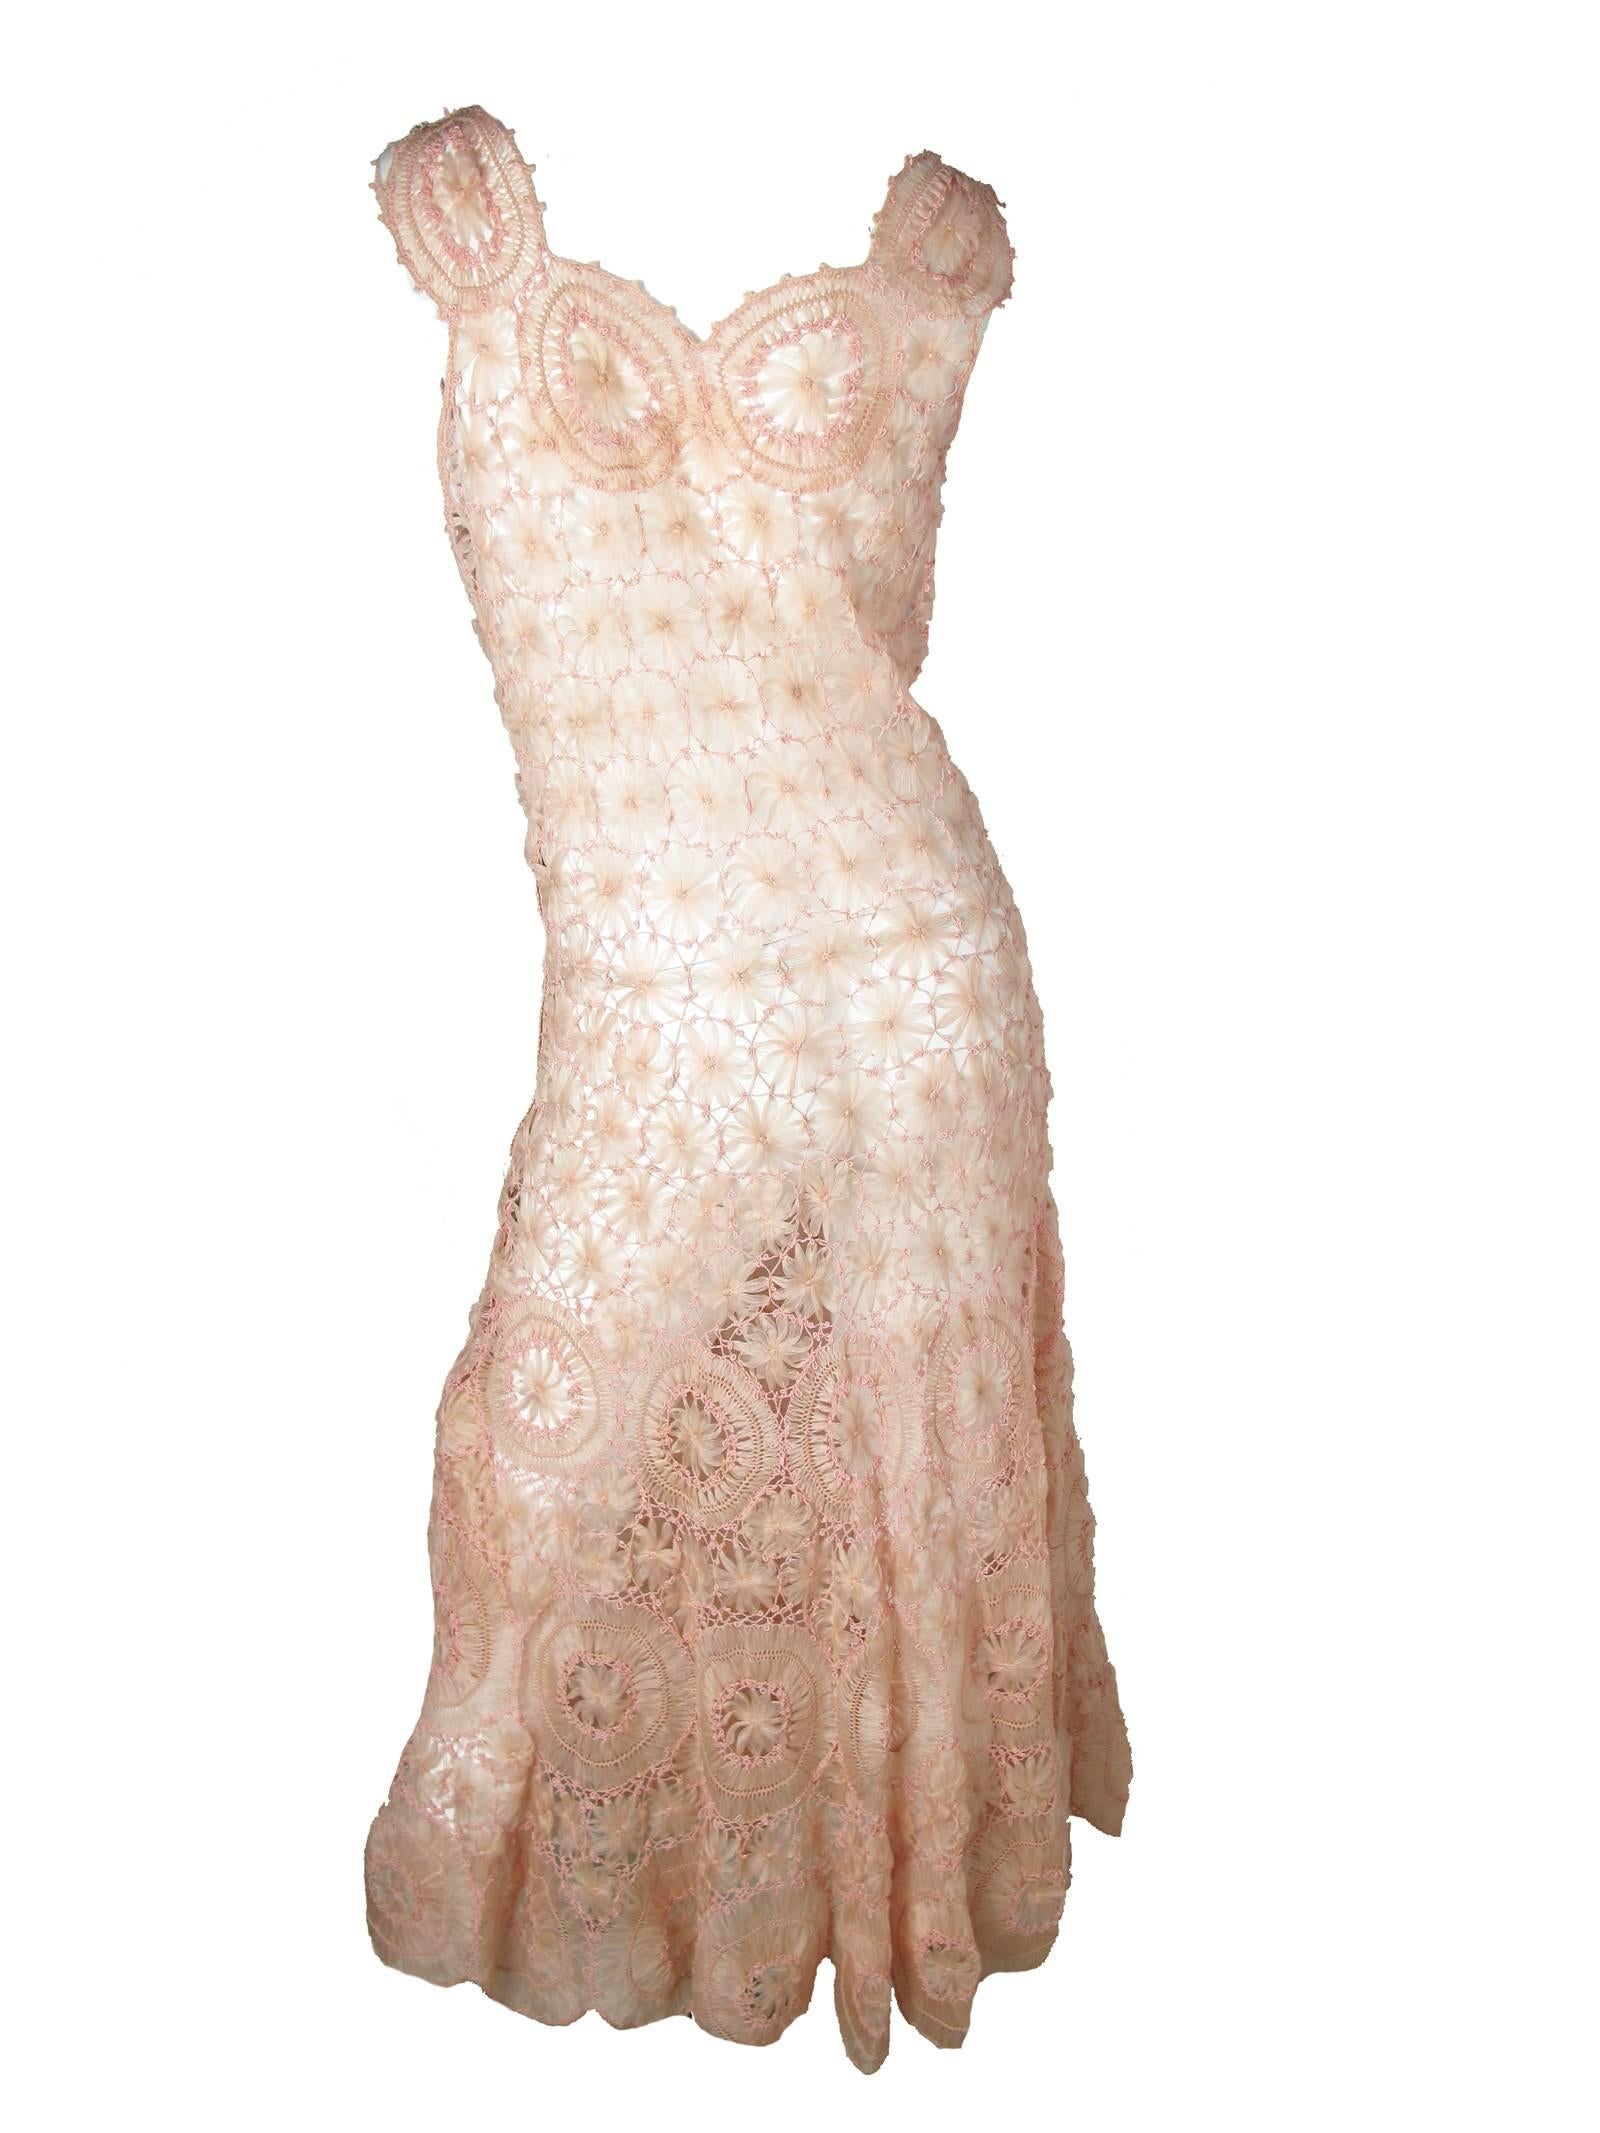 Pink crochet gown. Condition: Very good. Size 6

We accept returns for refund, please see our terms.  We offer free ground shipping within the US. Please let us know if you have any questions. 
